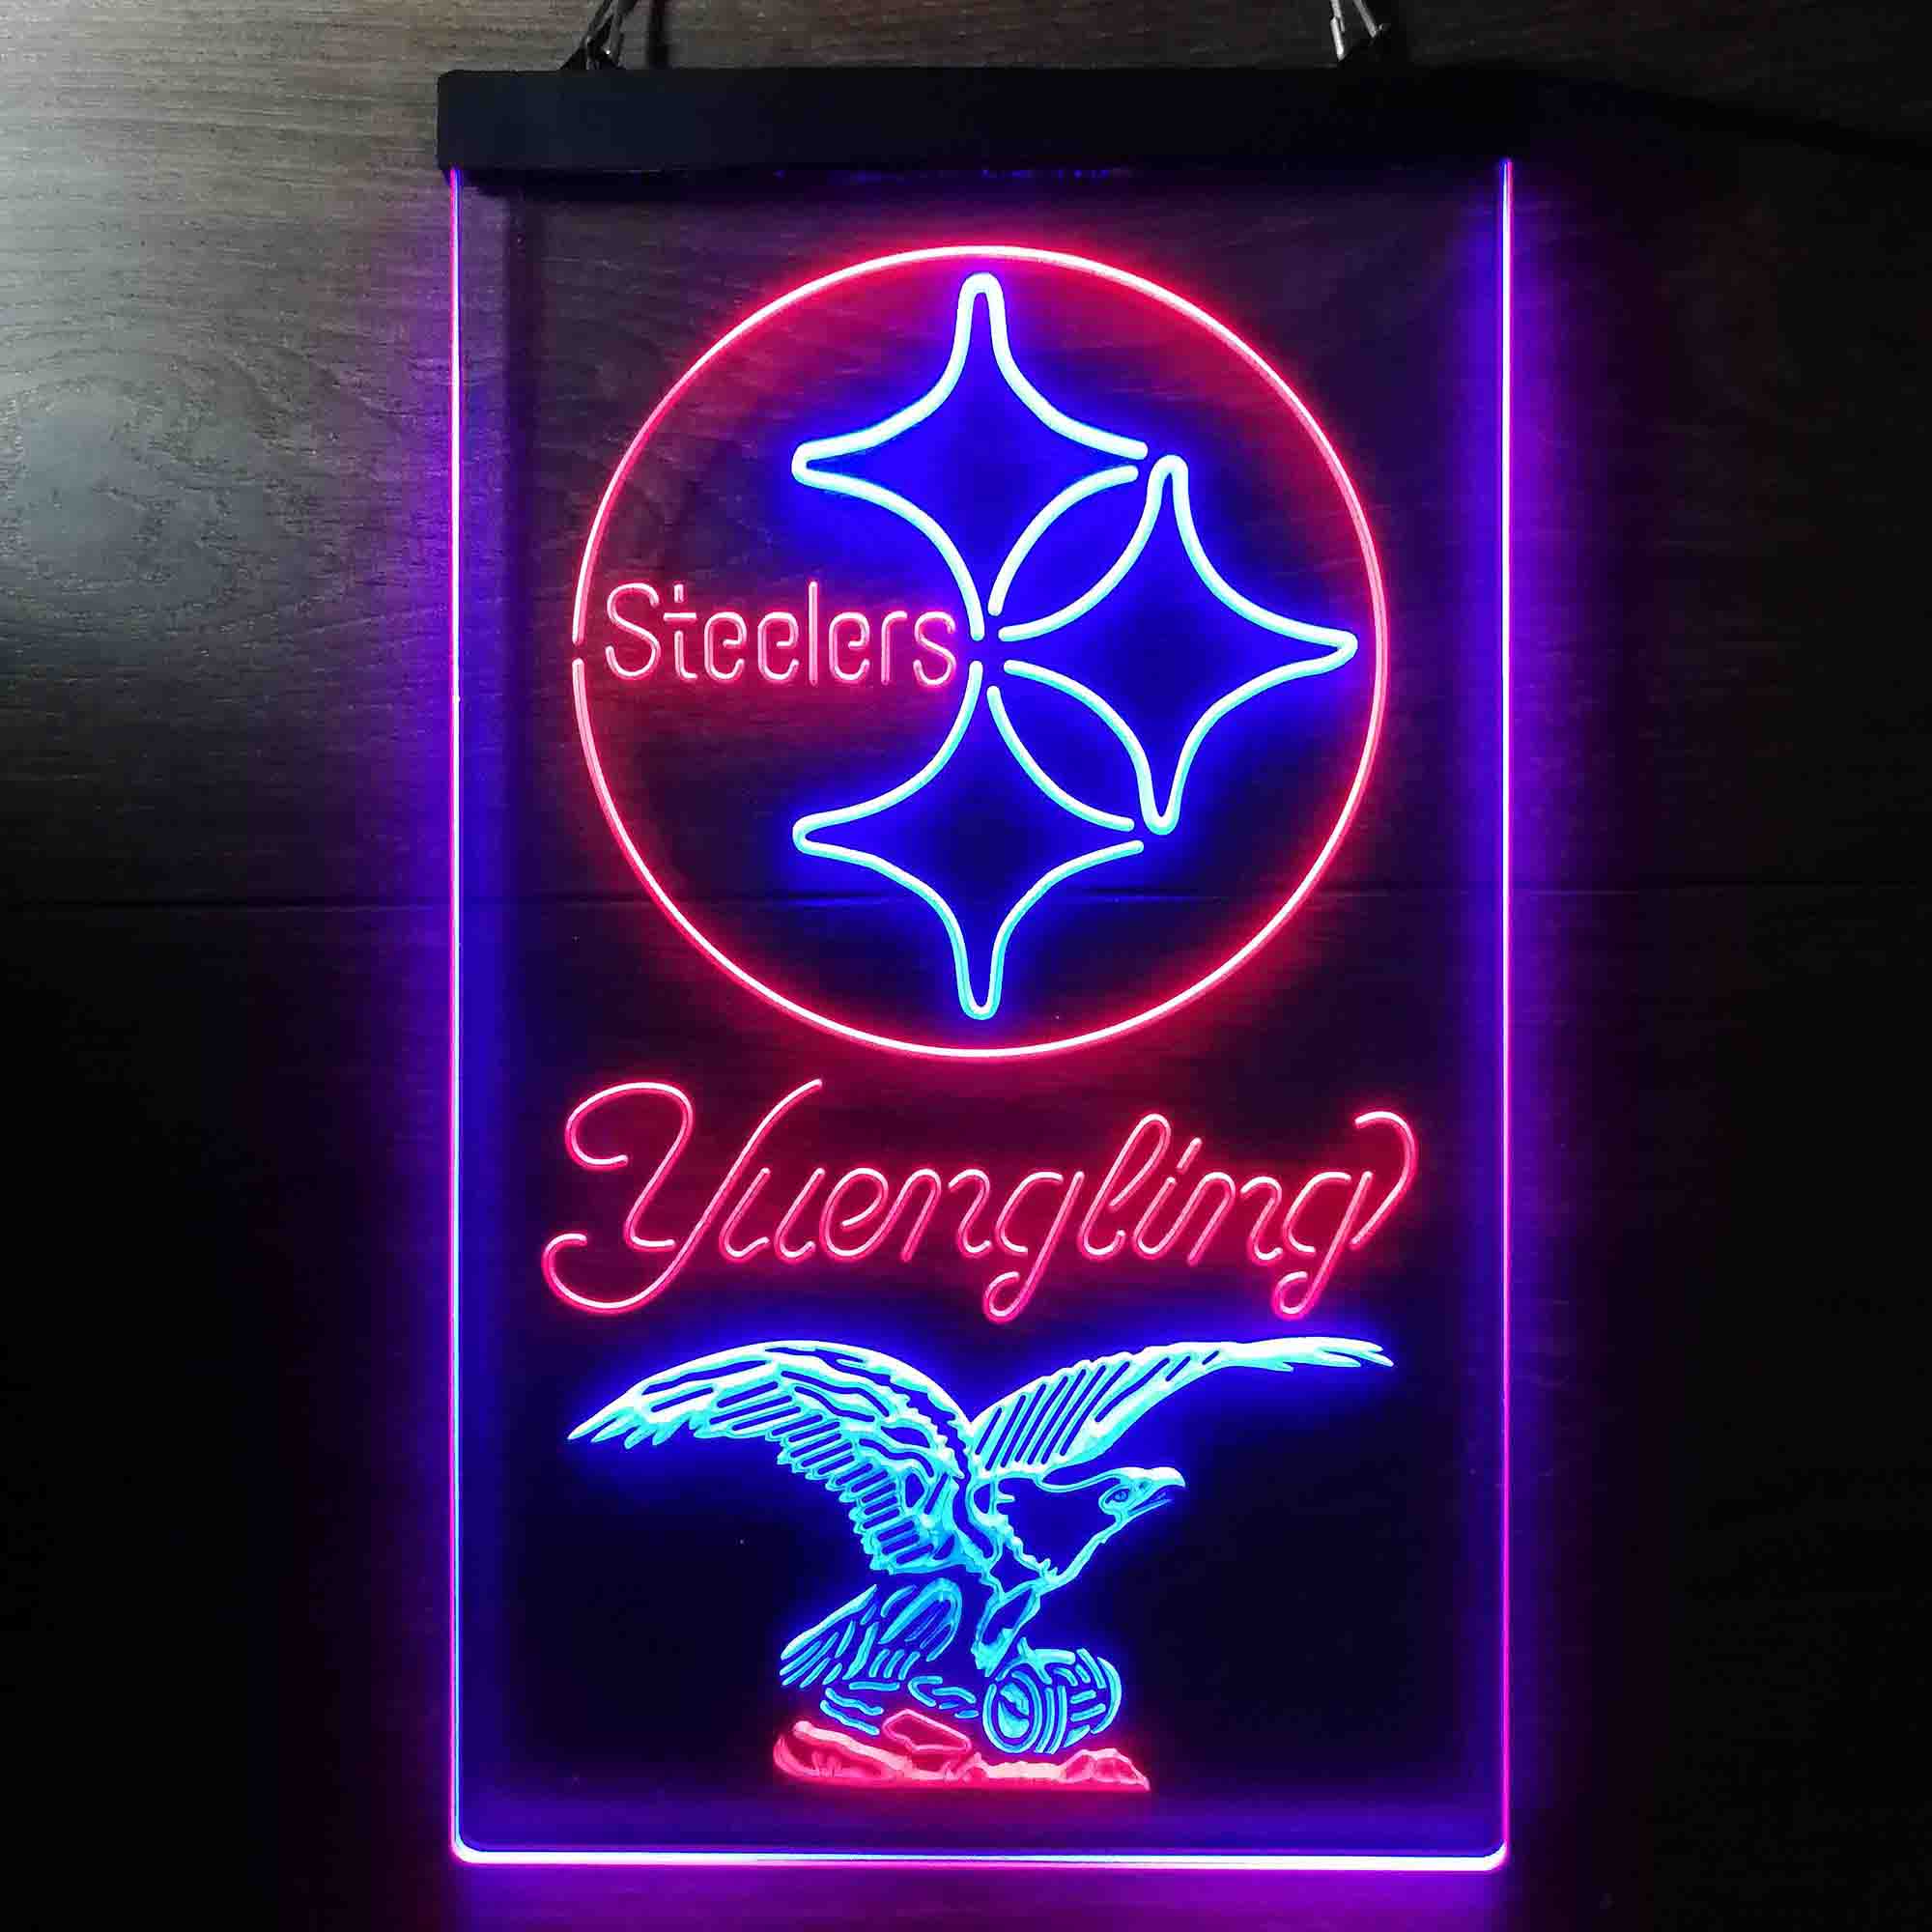 Yuengling Bar Pittsburgh Steelers Est. 1933 Neon-Like LED Sign